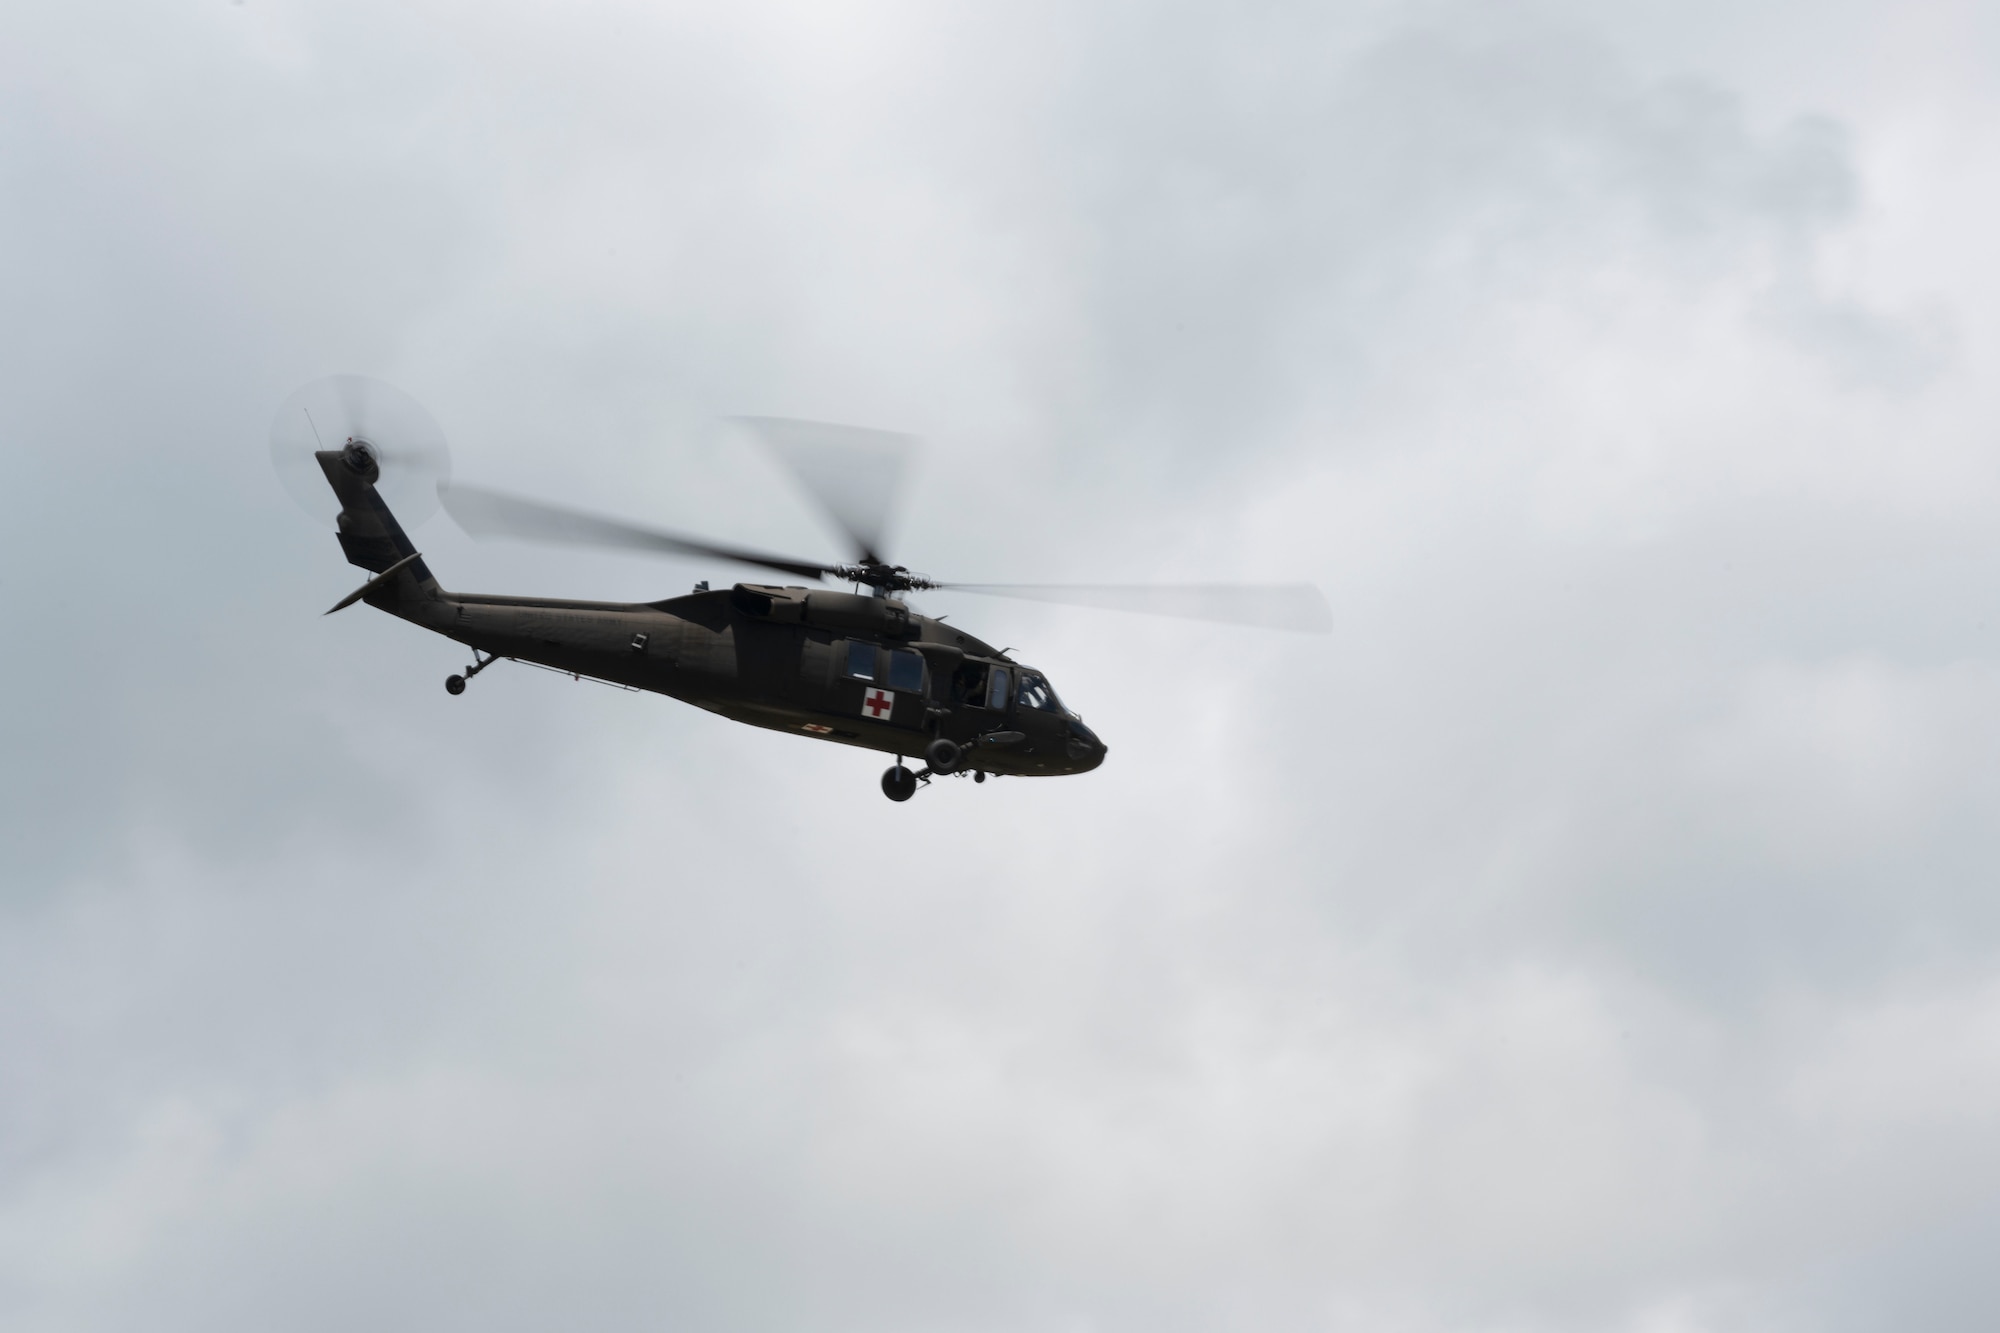 A UH-60 Black Hawk helicopter assigned to the Puerto Rico Army National Guard, flies overhead during the Advisor Edge exercise at Roosevelt Roads, Ceiba, Puerto Rico, June 8, 2023. Advisor Edge was a multi-unit exercise with the integration of government agencies, where participant units tested air advising skills and strengthened partnerships through unique challenges, allowing burden sharing in combat with partner nations. (U.S. Air National Guard photo by Master Sgt. Rafael D. Rosa)